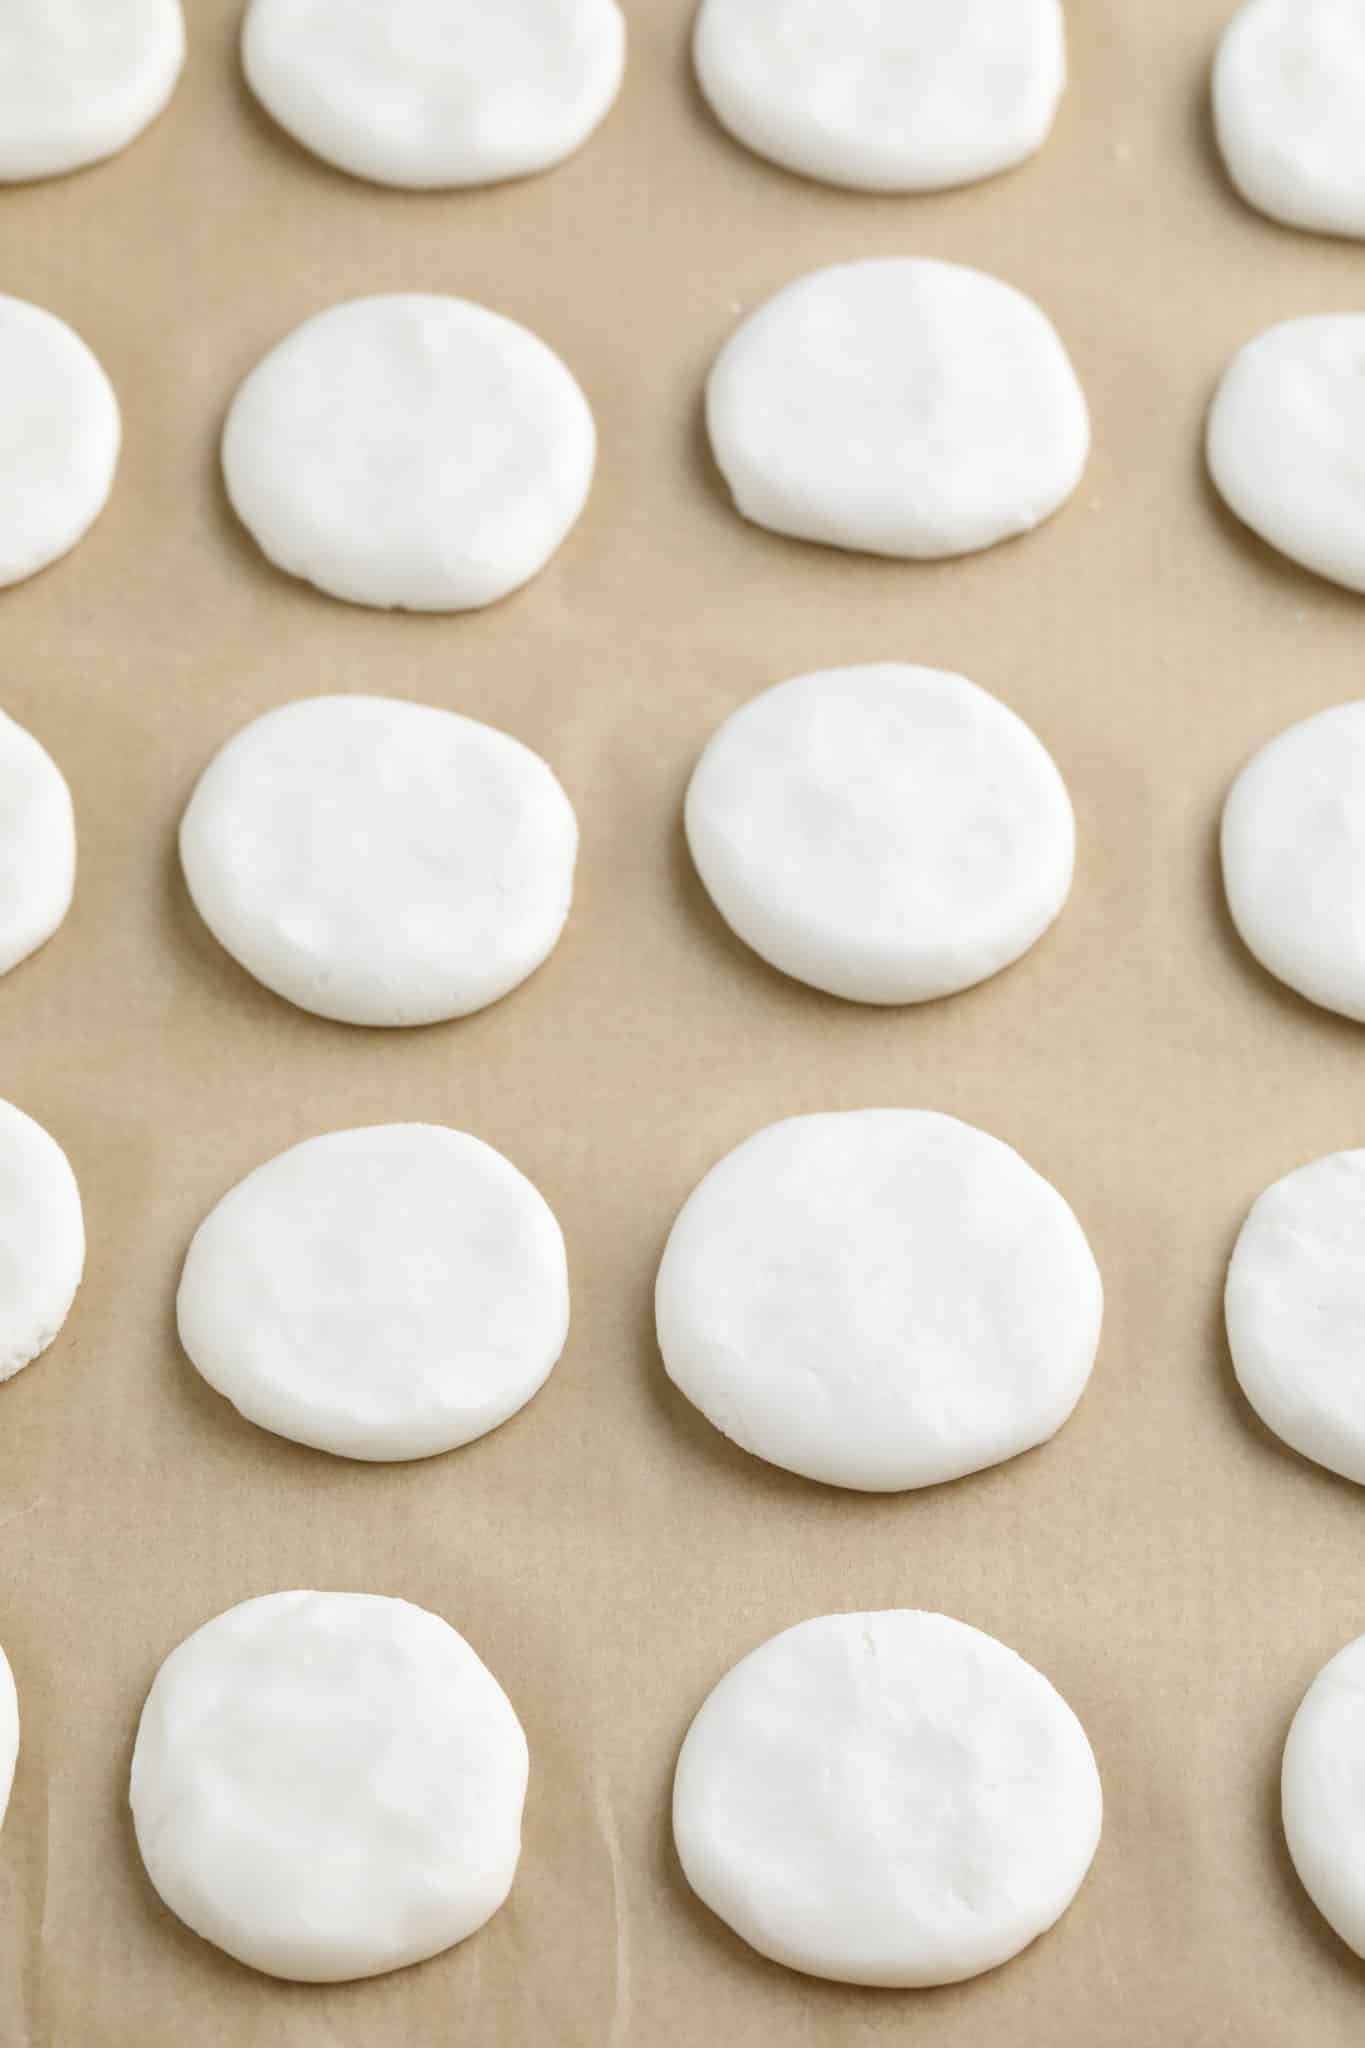 white discs in rows on a parchment-lined baking sheet.